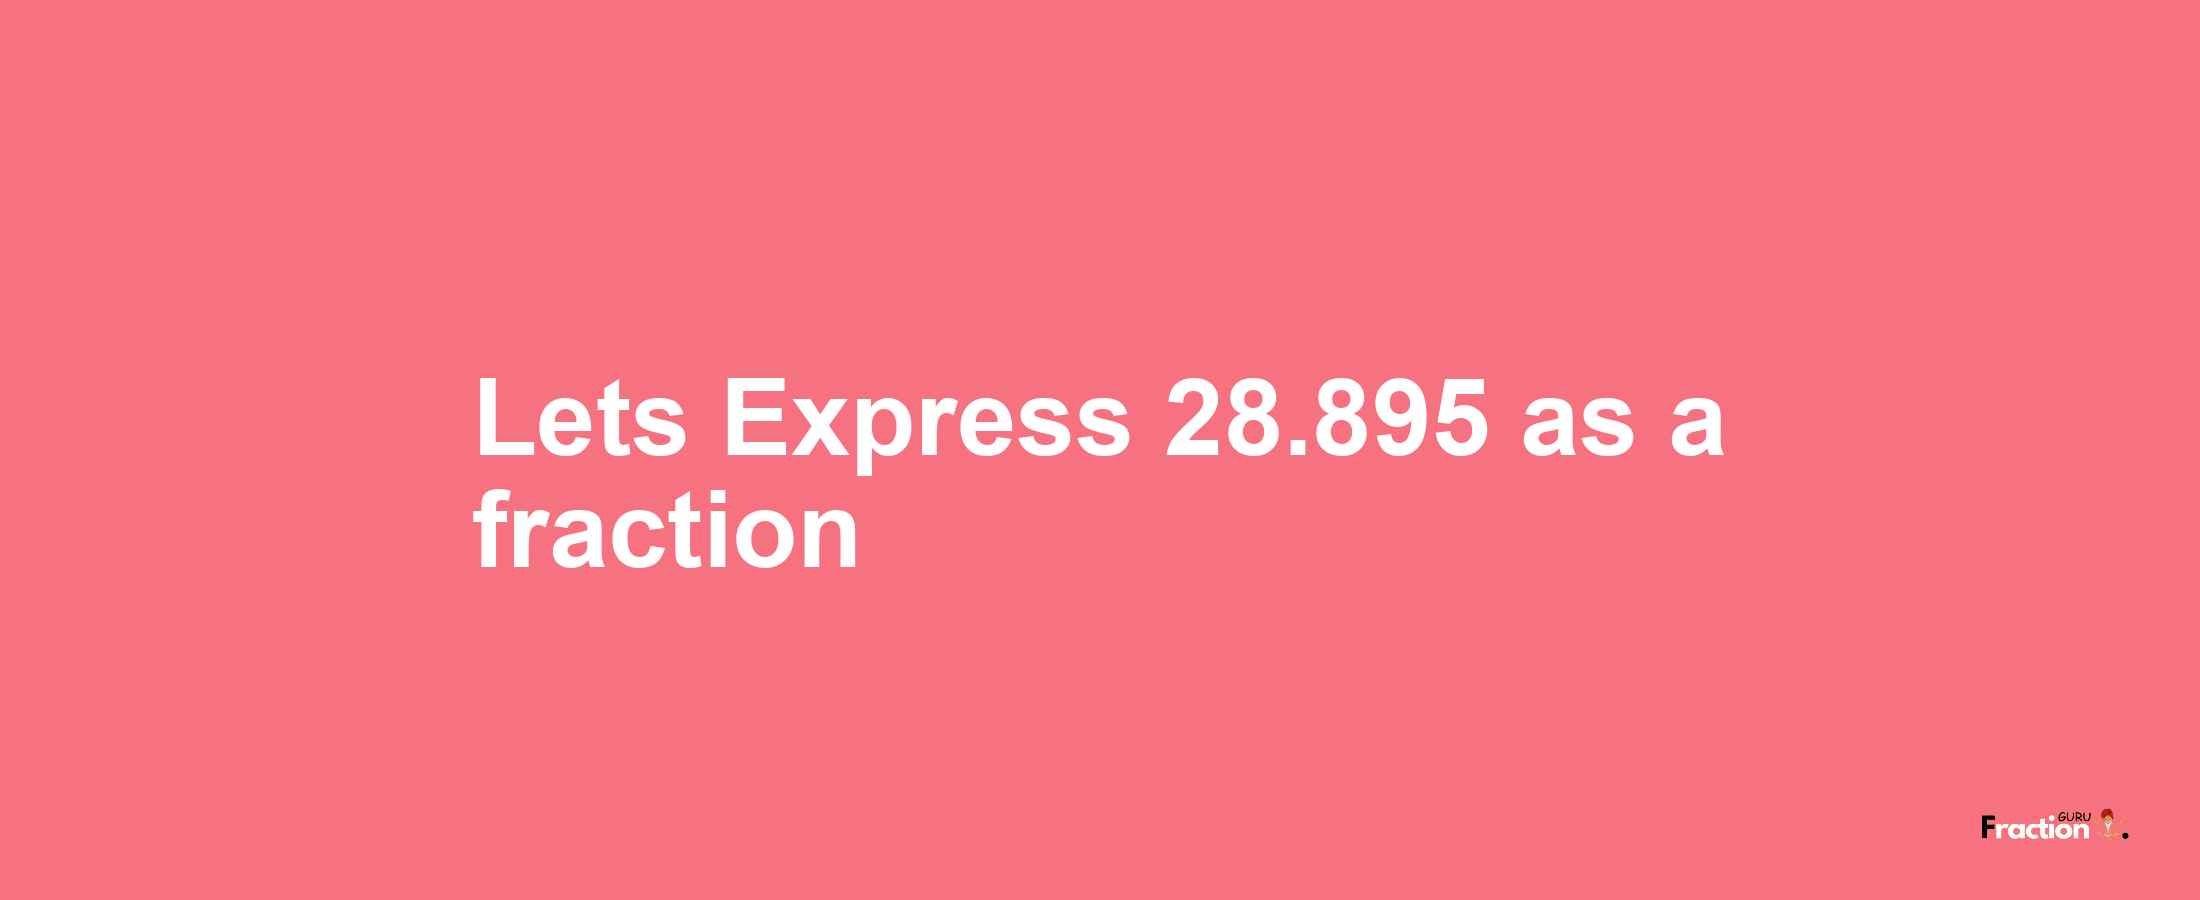 Lets Express 28.895 as afraction